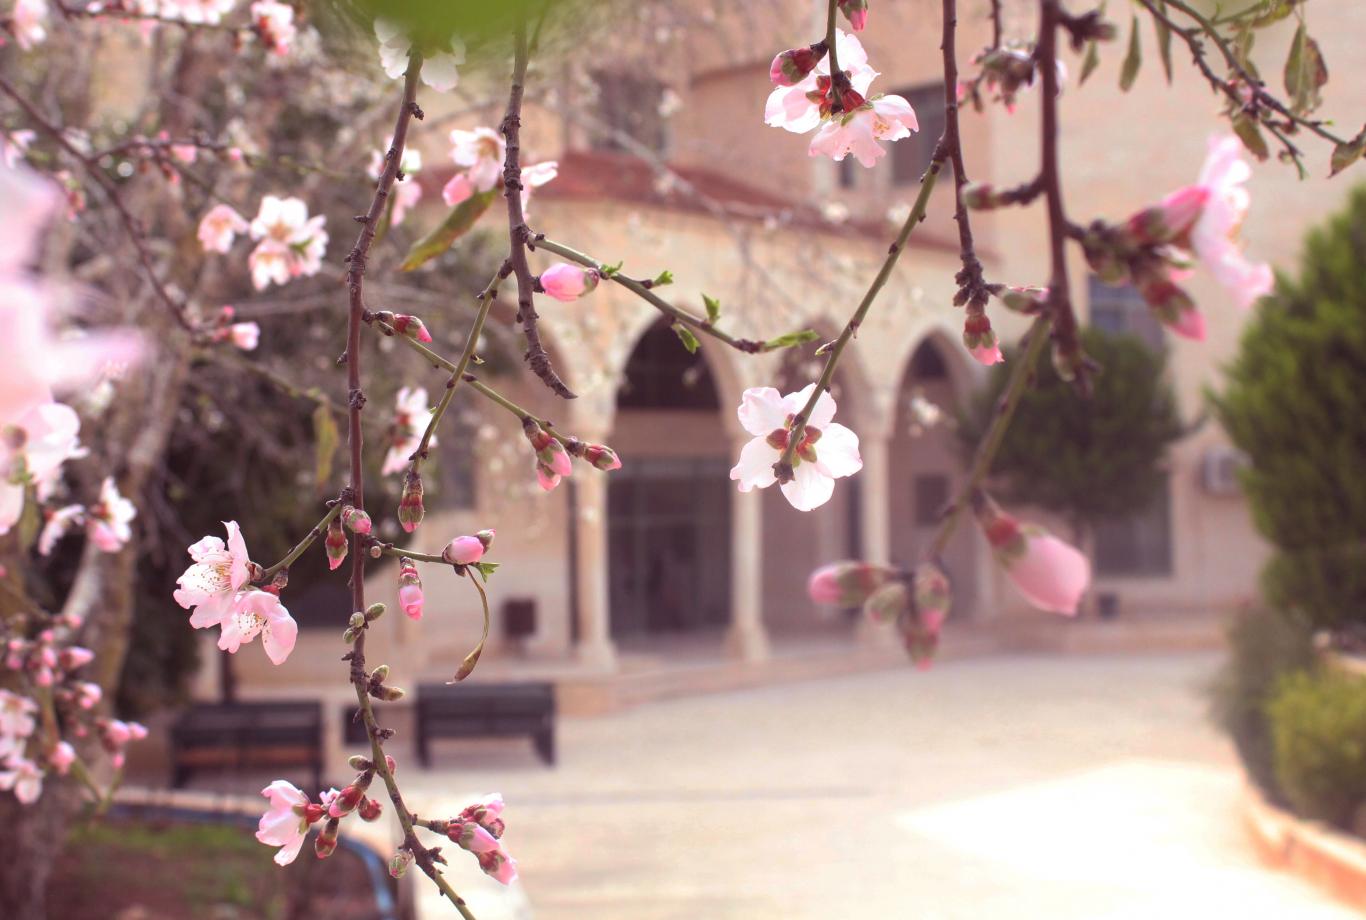 Almond blossom in front of the Faculty of Engineering and Information Technology